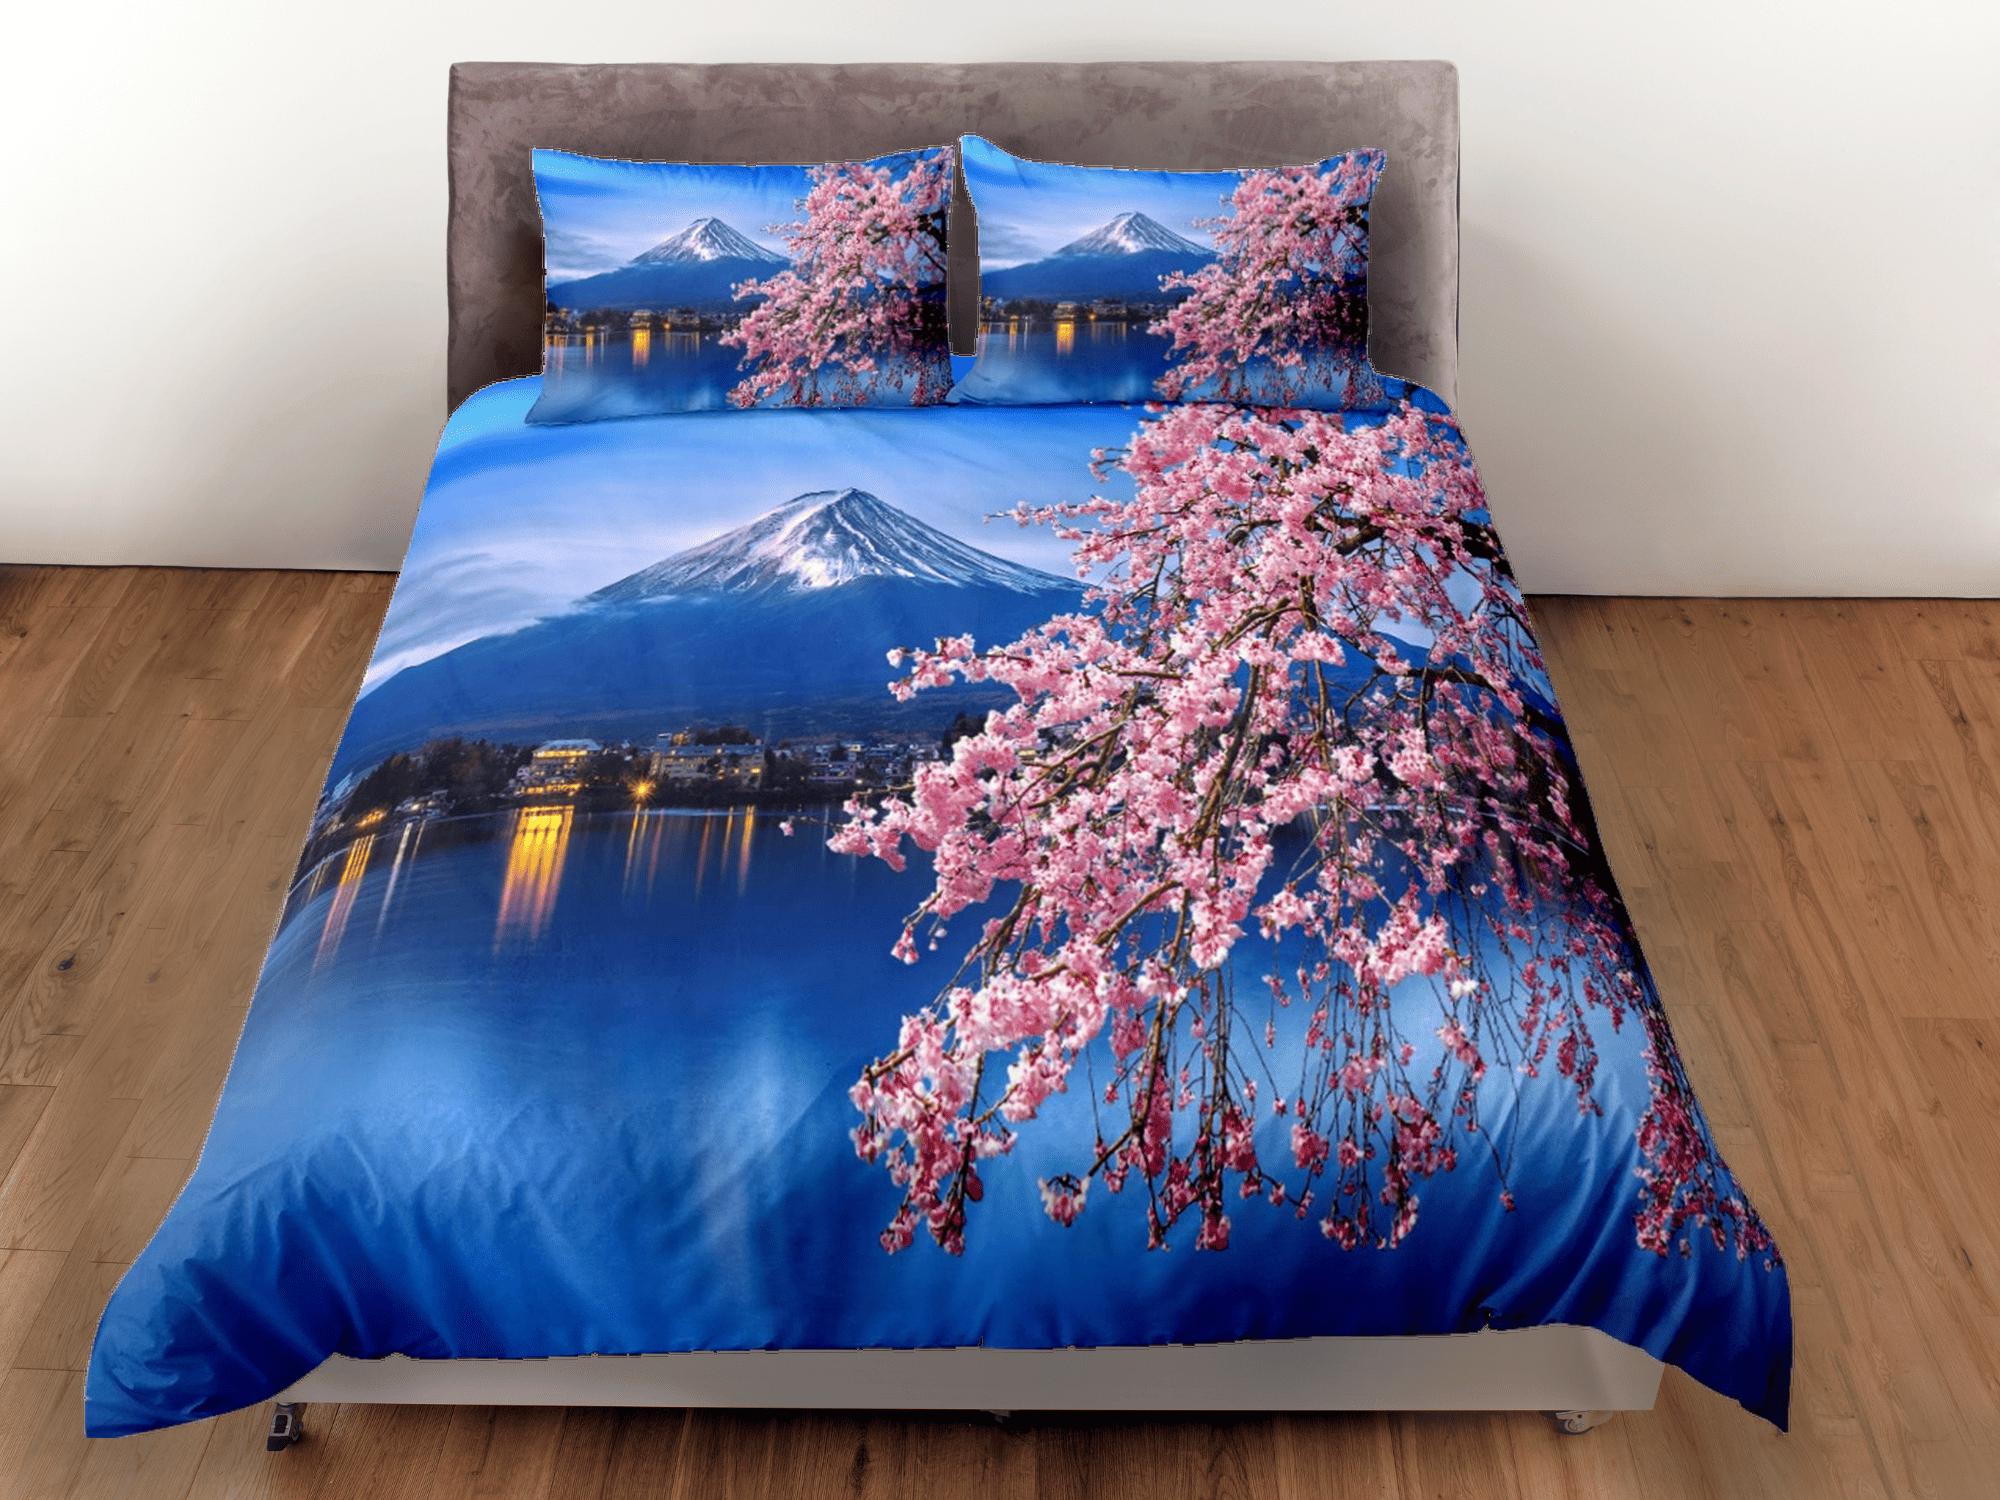 daintyduvet Cherry blossoms and mt. fuji printed bedding, japanese duvet cover set for king, queen, full, twin, single, toddler, zipper bedding